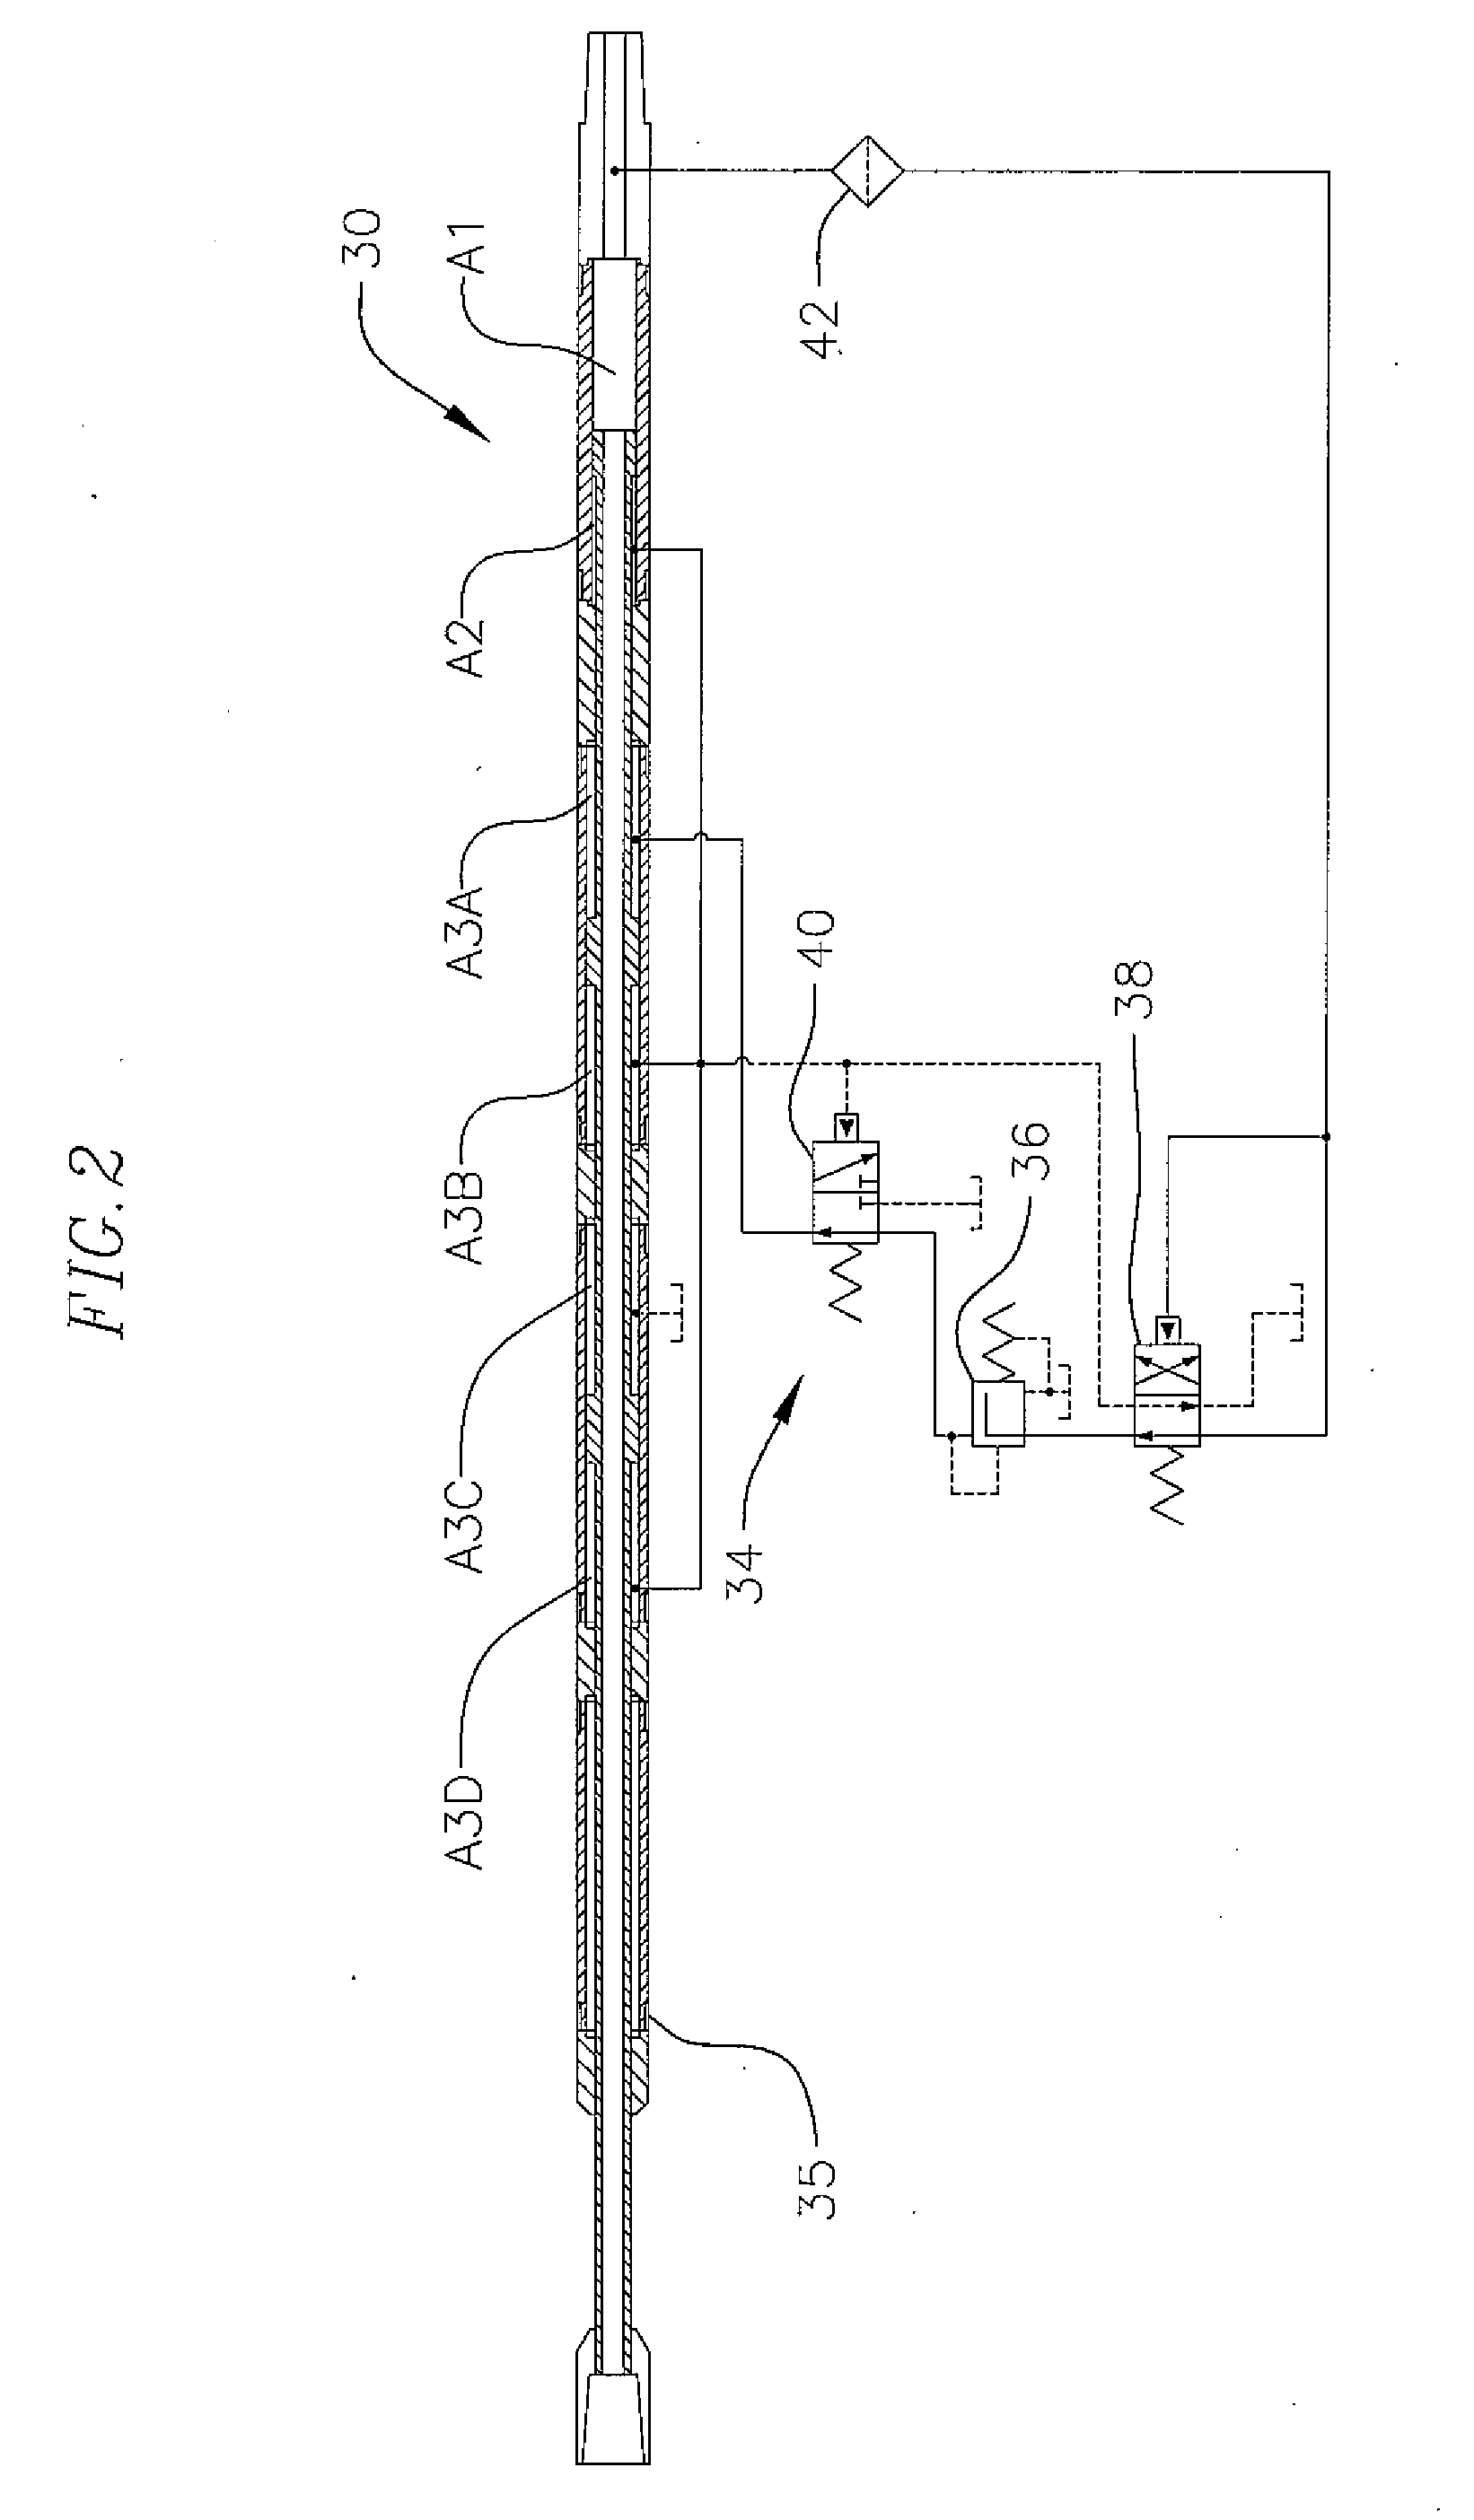 Electrical controller for Anti-stall tools for downhole drilling assemblies and method of drilling optimization by downhole devices